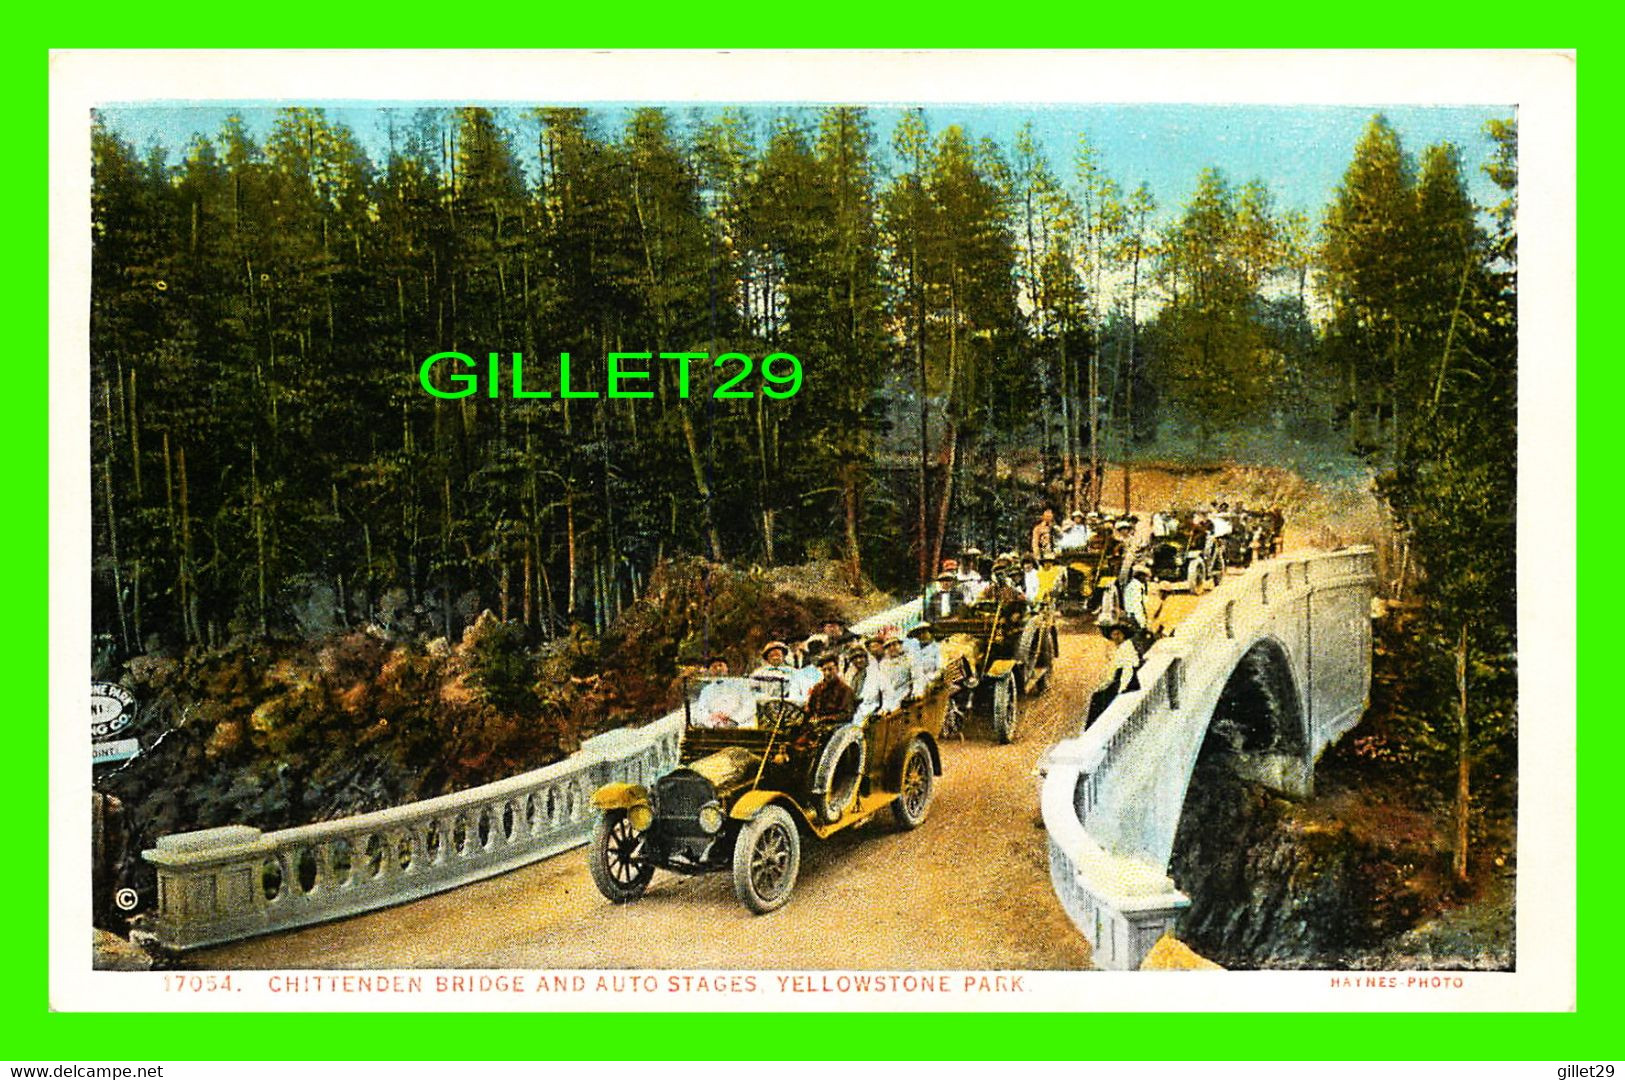 YELLOWSTONE, WY - CHITTENDEN BRIDGE AND AUTO STAGES - ANIMATED WITH PEOPLES & OLD CARS  - PUB. BY J. E. HAYNES - - Yellowstone